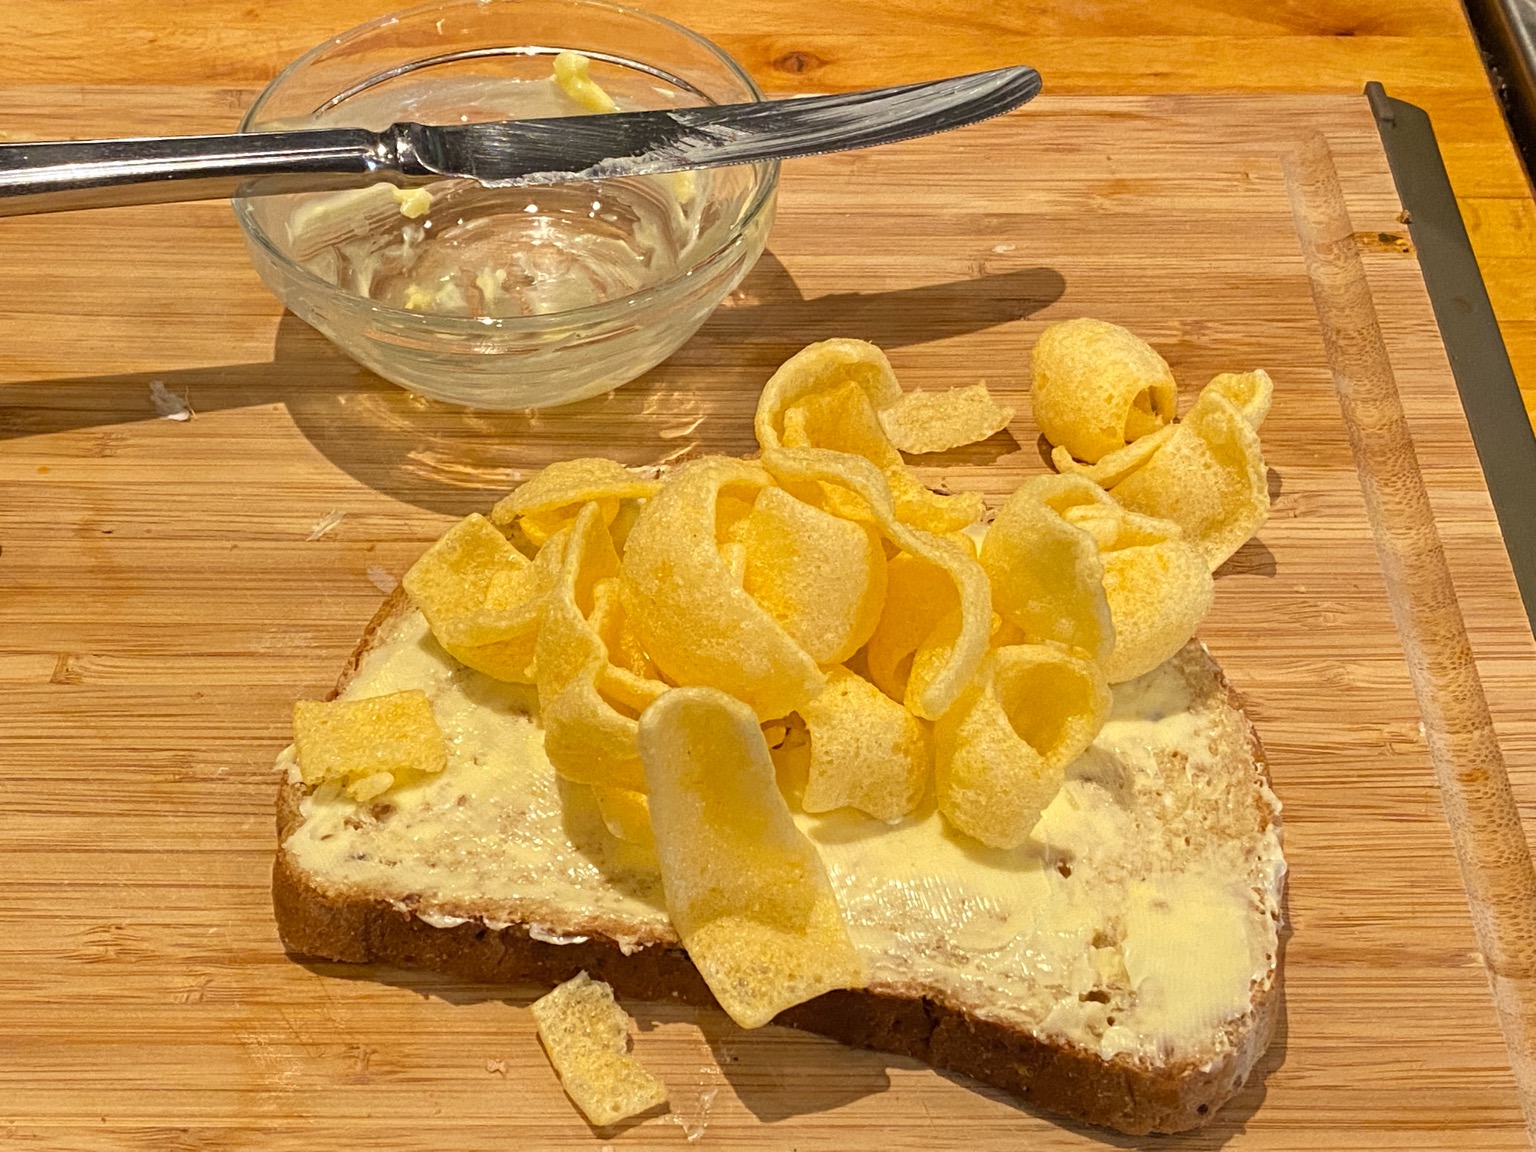 Quavers on brown bread alongside knife and dish